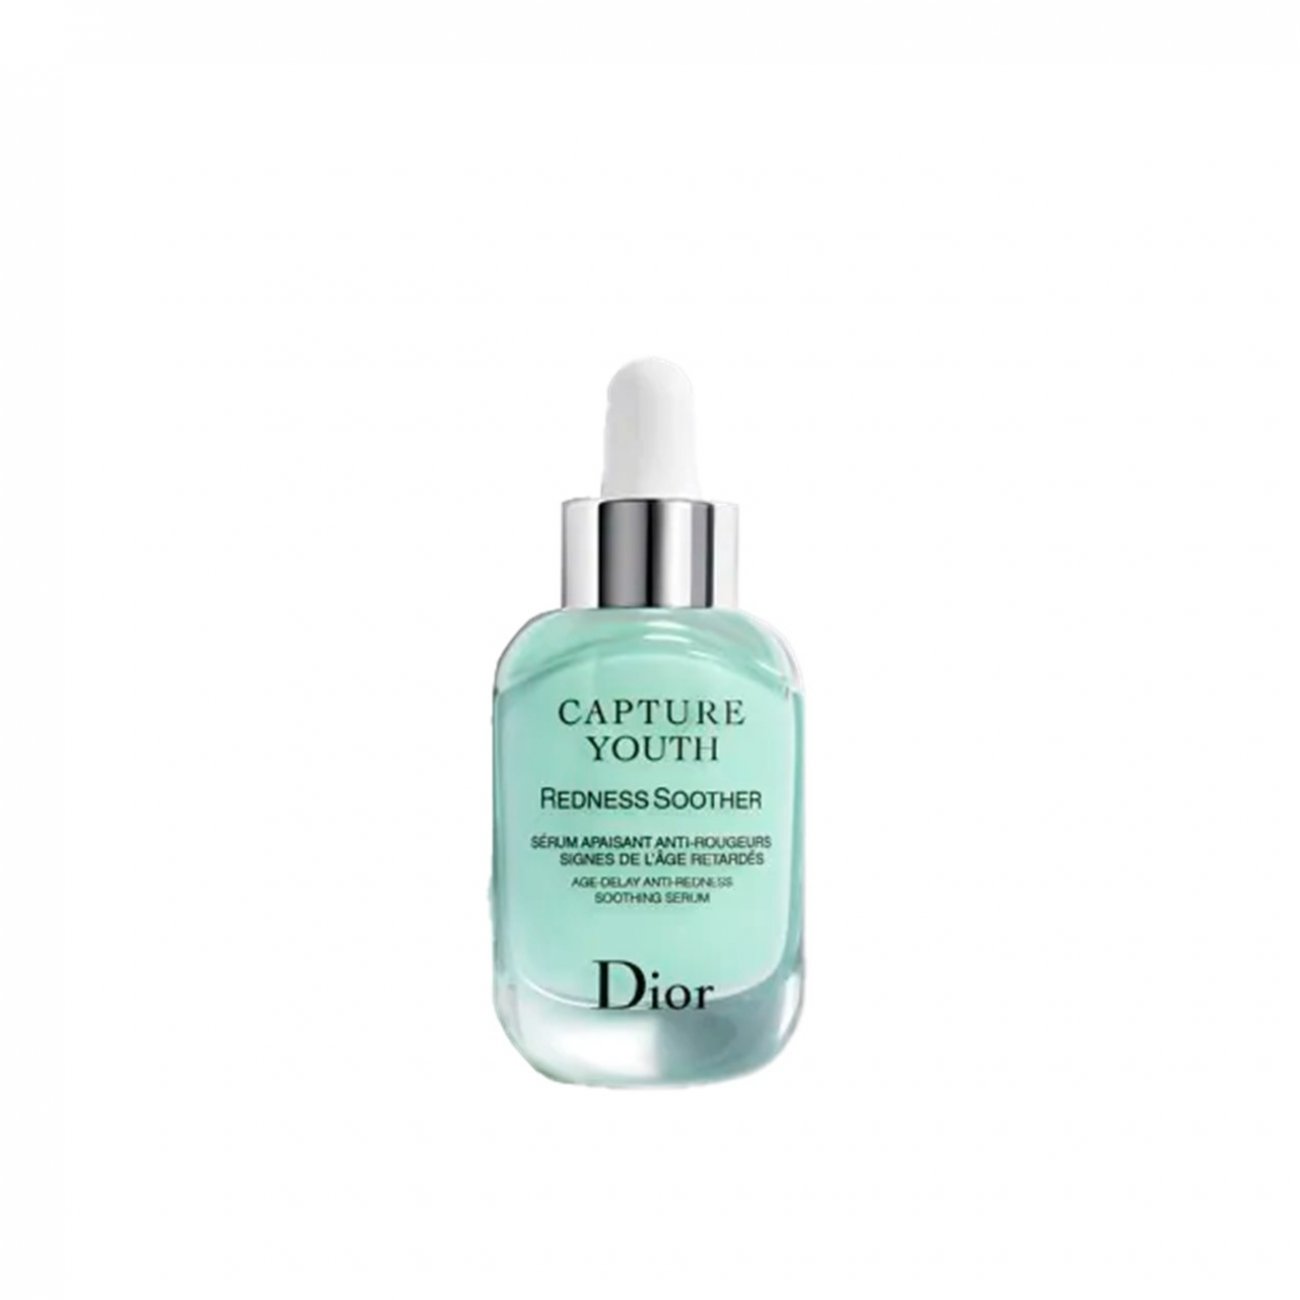 Capture Youth Matte maximizer  agedelay matifying serum  The collections   Skincare  DIOR